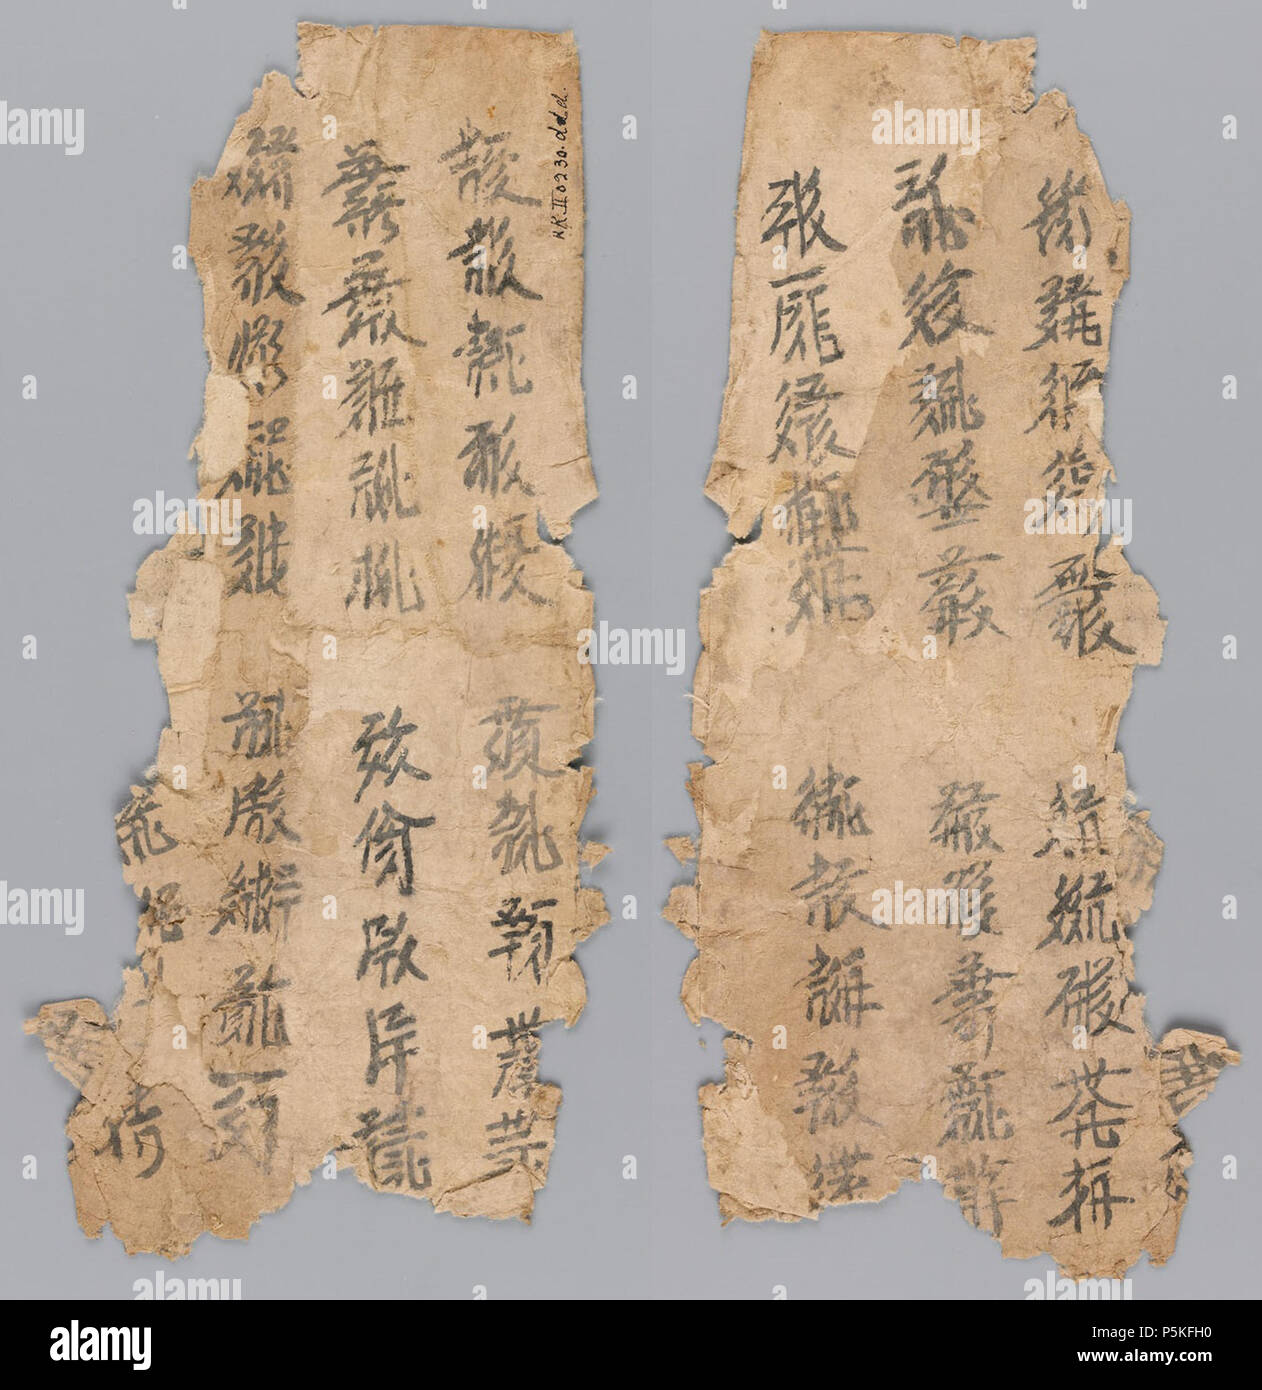 N/A. English: Both sides of a fragment of a manuscript copy of the Tangut thousand character poem, The Golden Guide (Chinese ), found at Kharakhoto by Aurel Stein during his expedition of 1913-1916; now held at the British Library Or.12380/2581. This fragment covers lines 160–165 and 166–171 of the 200 line poem. 12th century. Unknown 236 British Library Or 12380 2581 Stock Photo